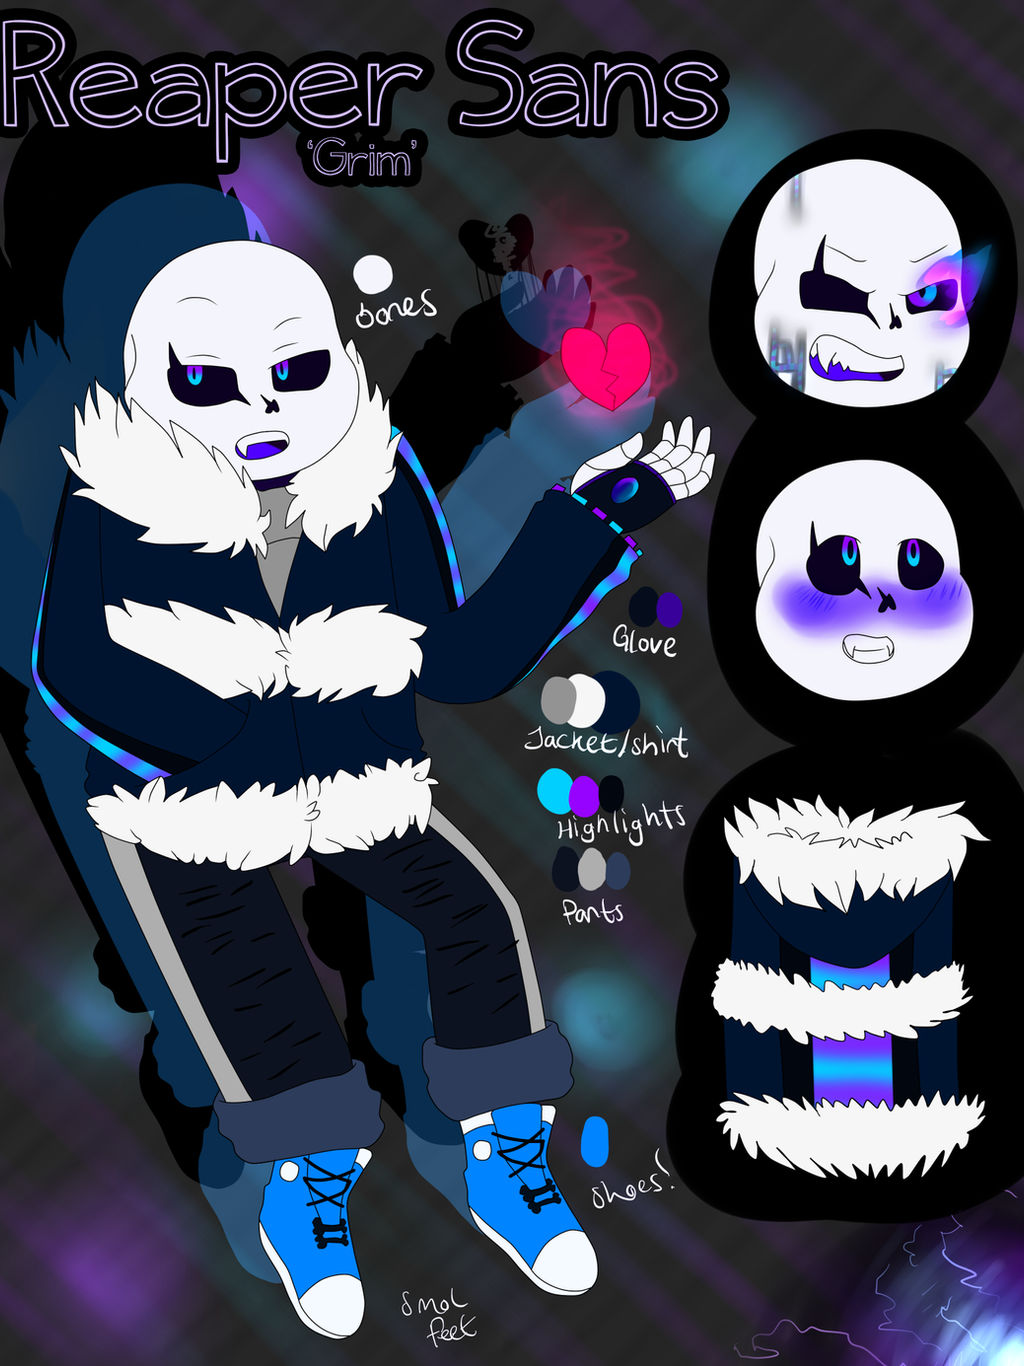 Voidentceytale character ref: Feral Sans Galactic Reaper - Illustrations  ART street